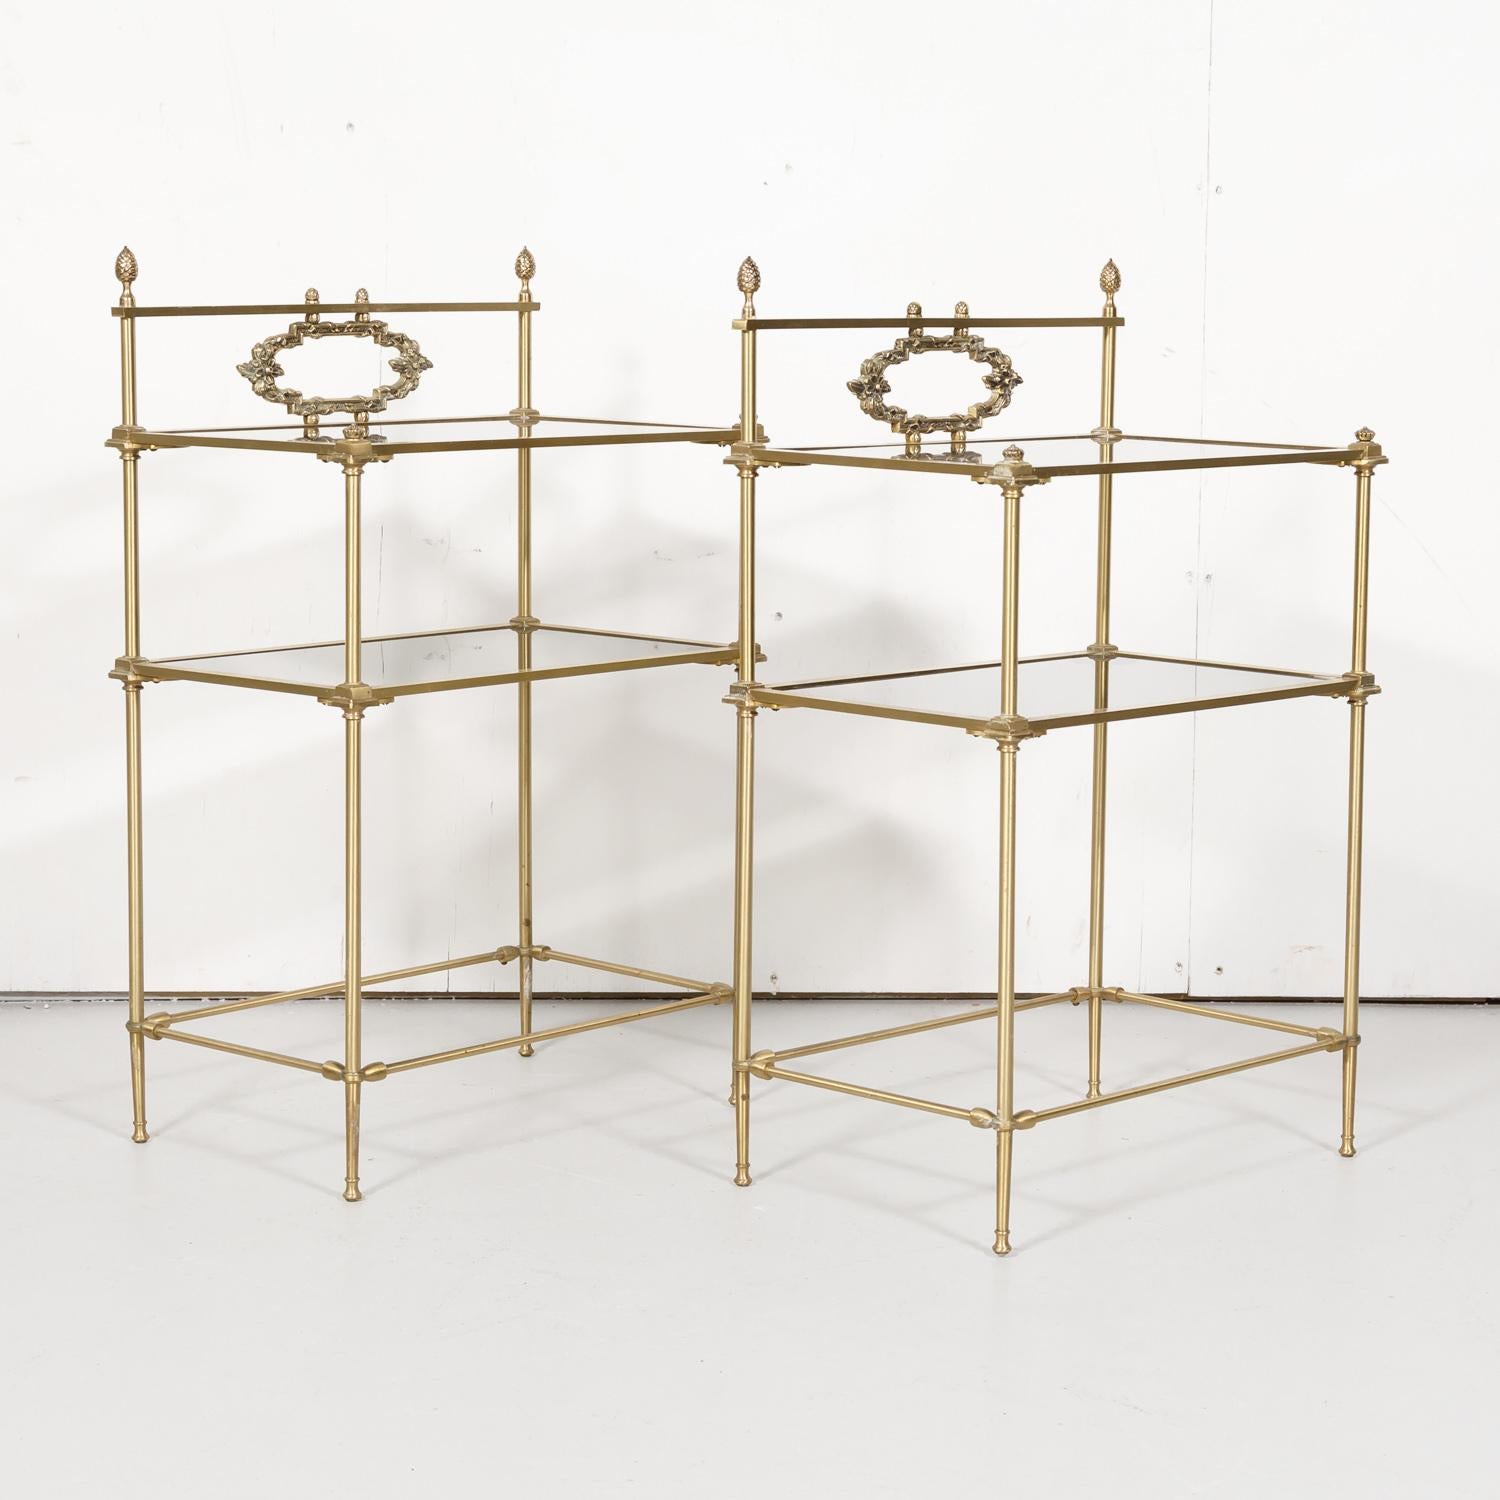 A very nice pair of small vintage French Louis XVI style brass tiered shelves or side tables each having two inset smoked glass shelves and decorative brass trim with pinecone finials, circa 1930s. Wonderful as side tables or end tables. Many